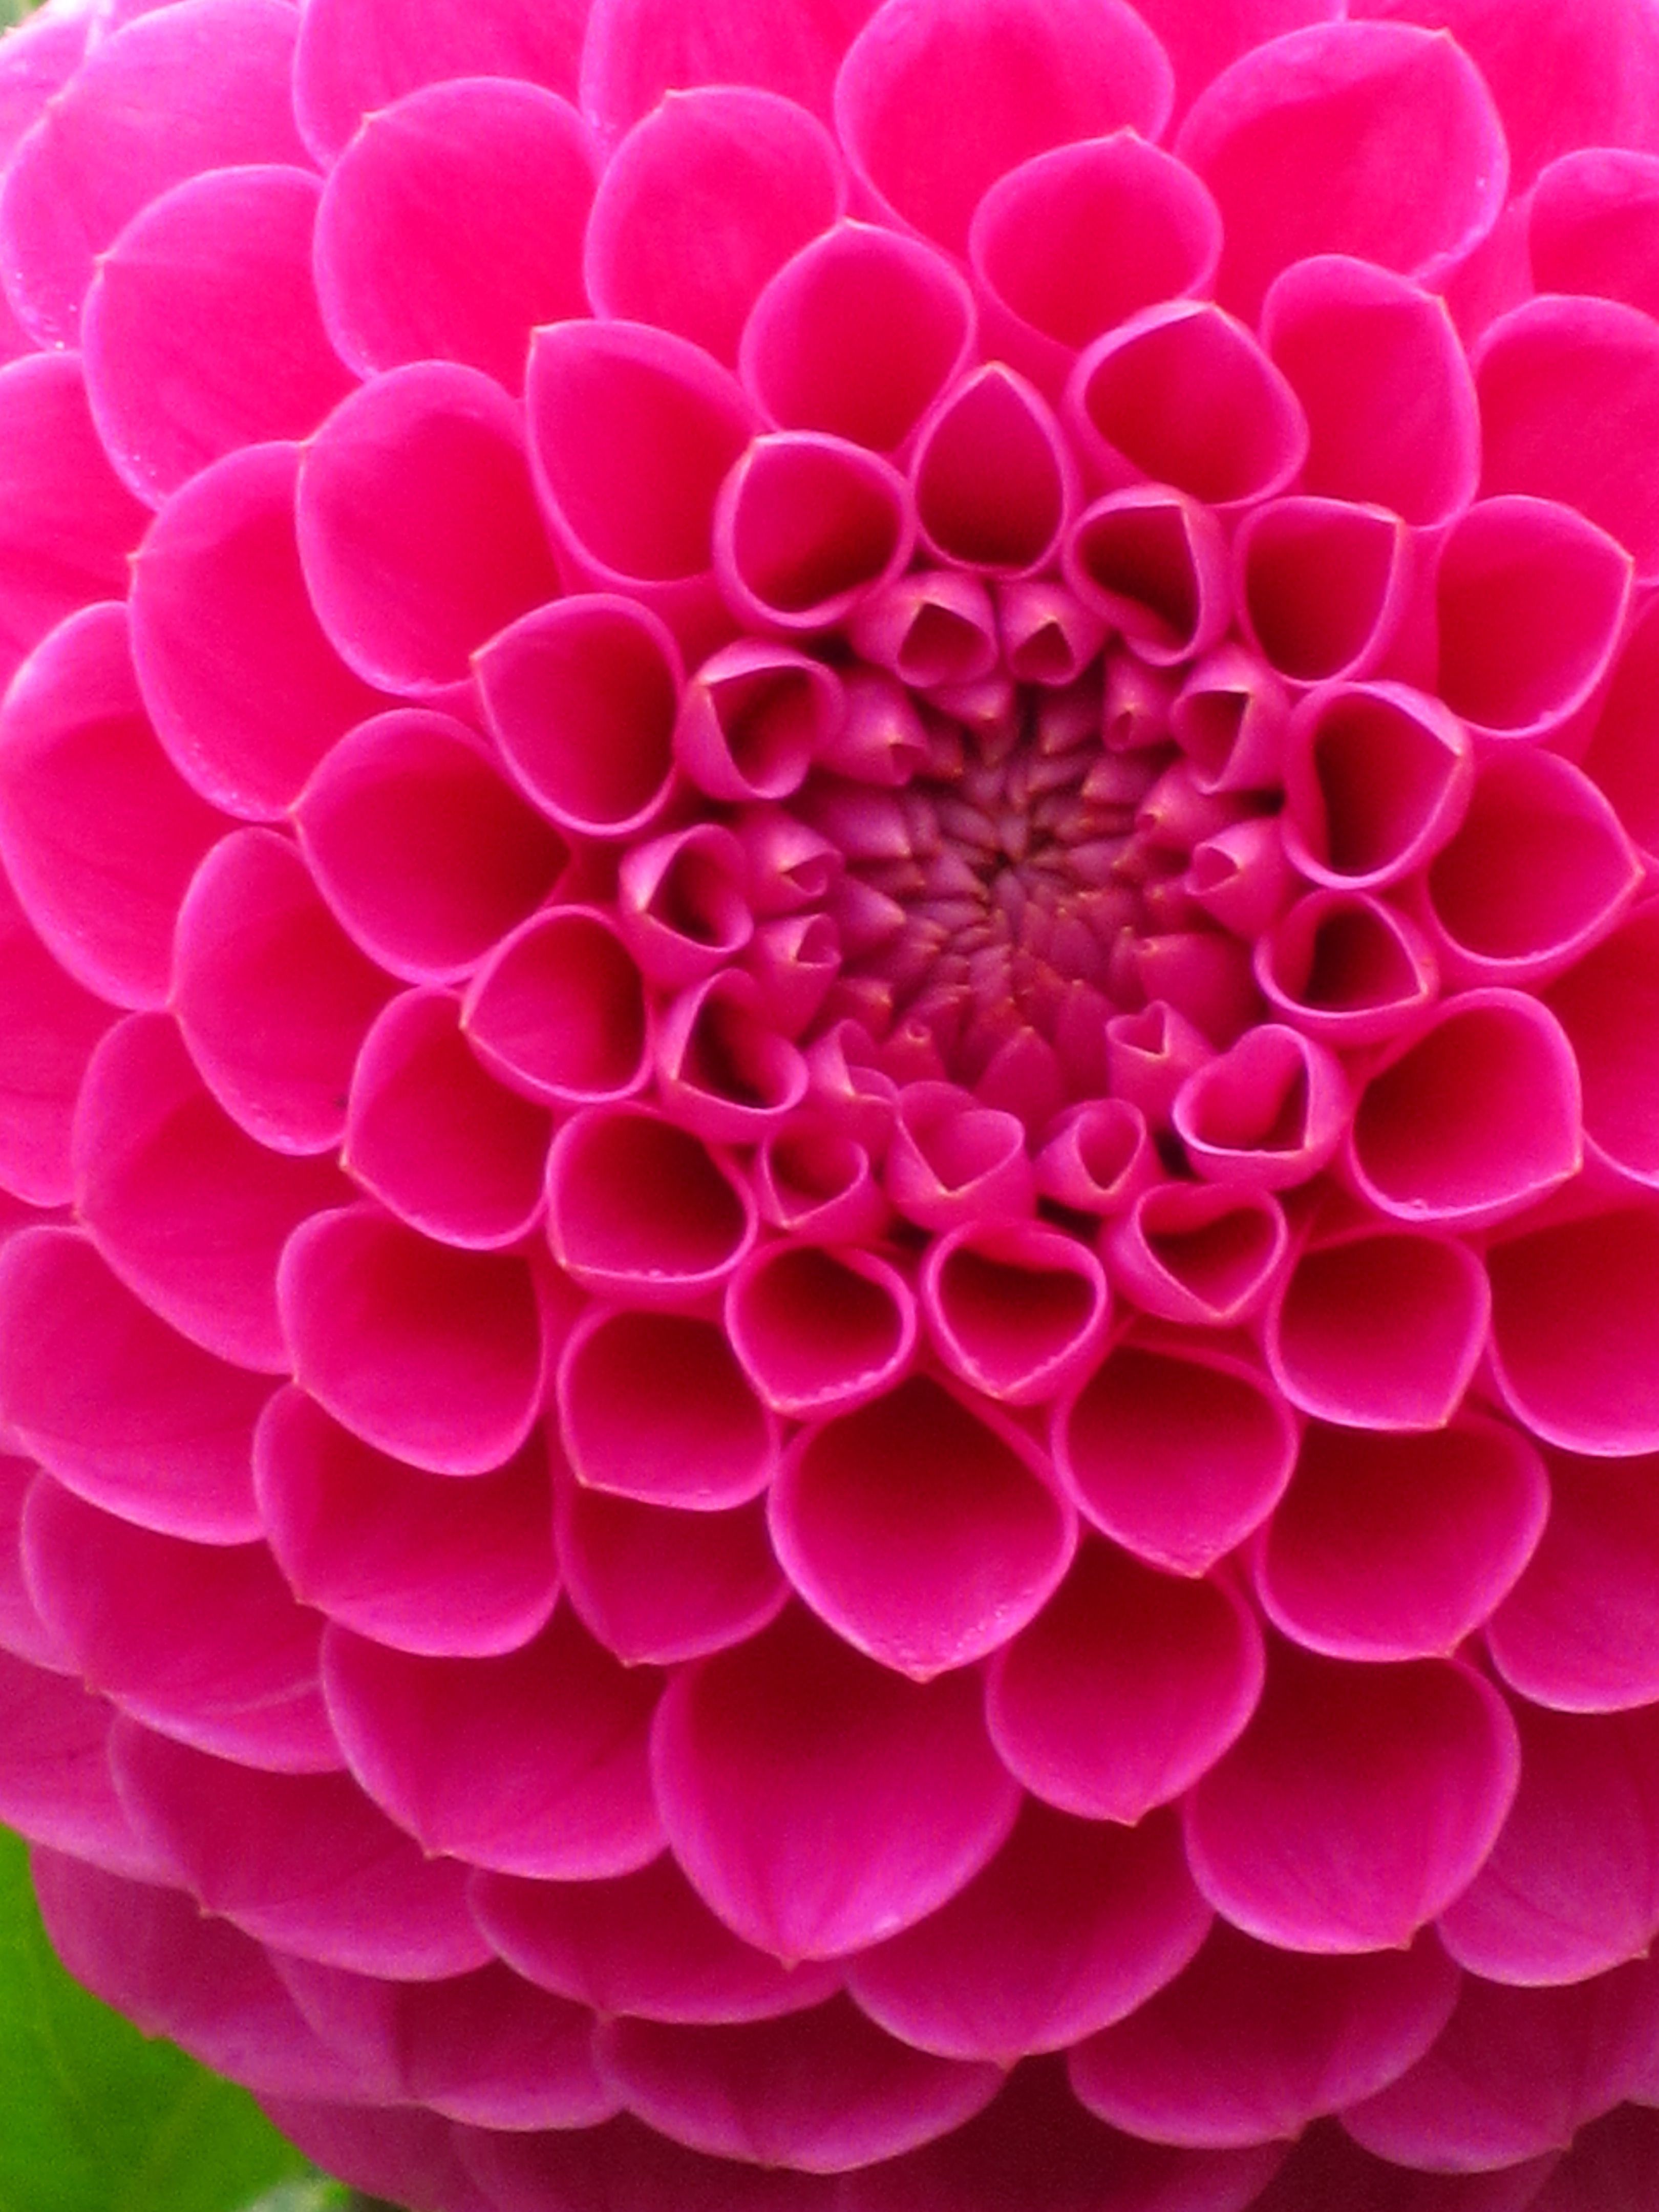 A close up of the center part on this flower - Beautiful